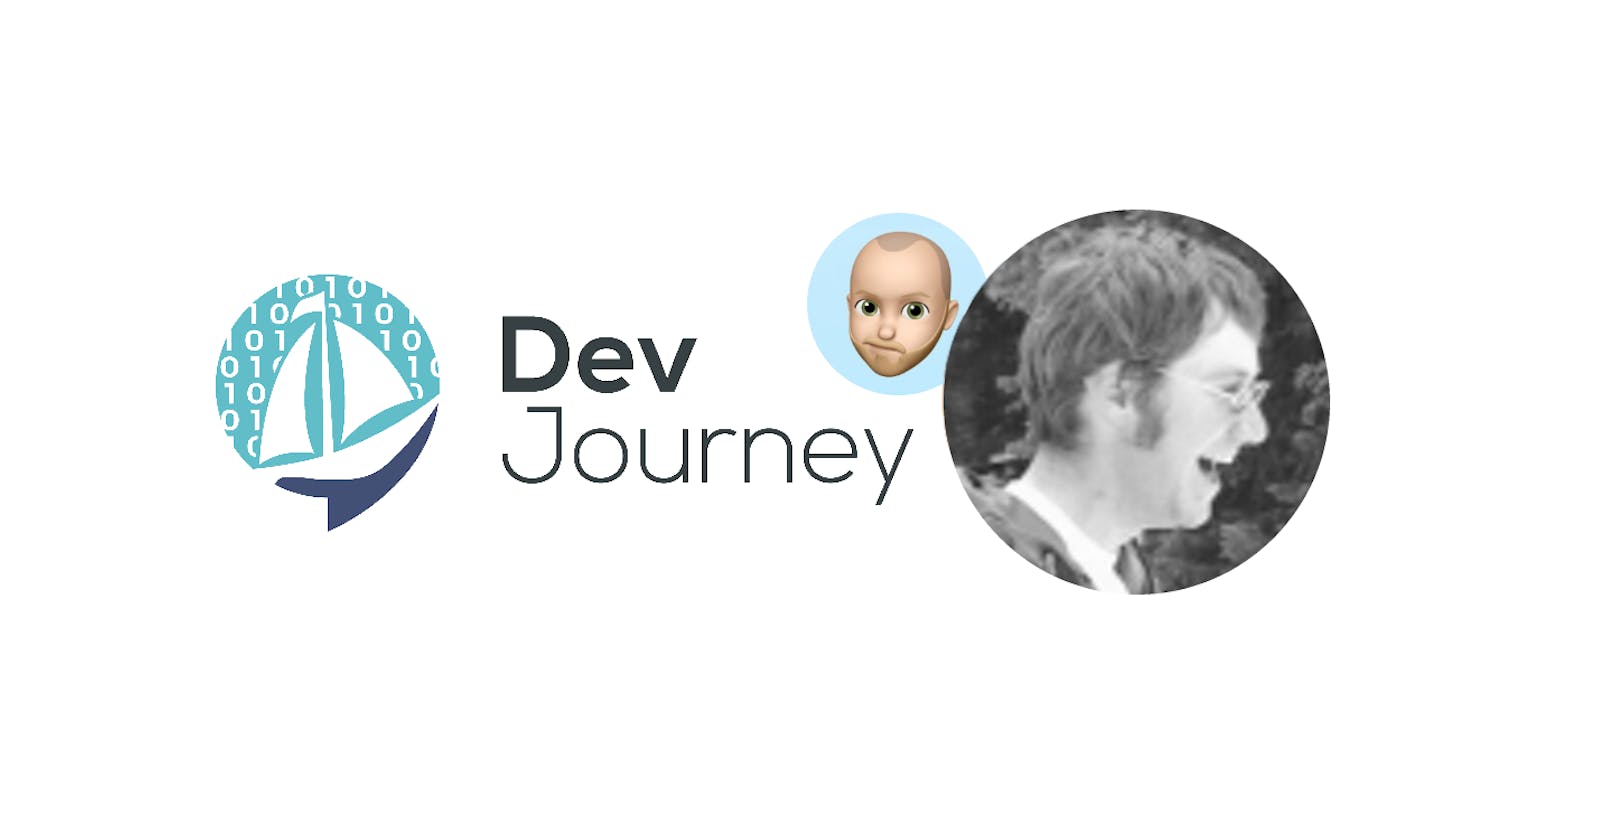 Dan Moore went from sci-fi to devrel... and other things I learned recording his DevJourney